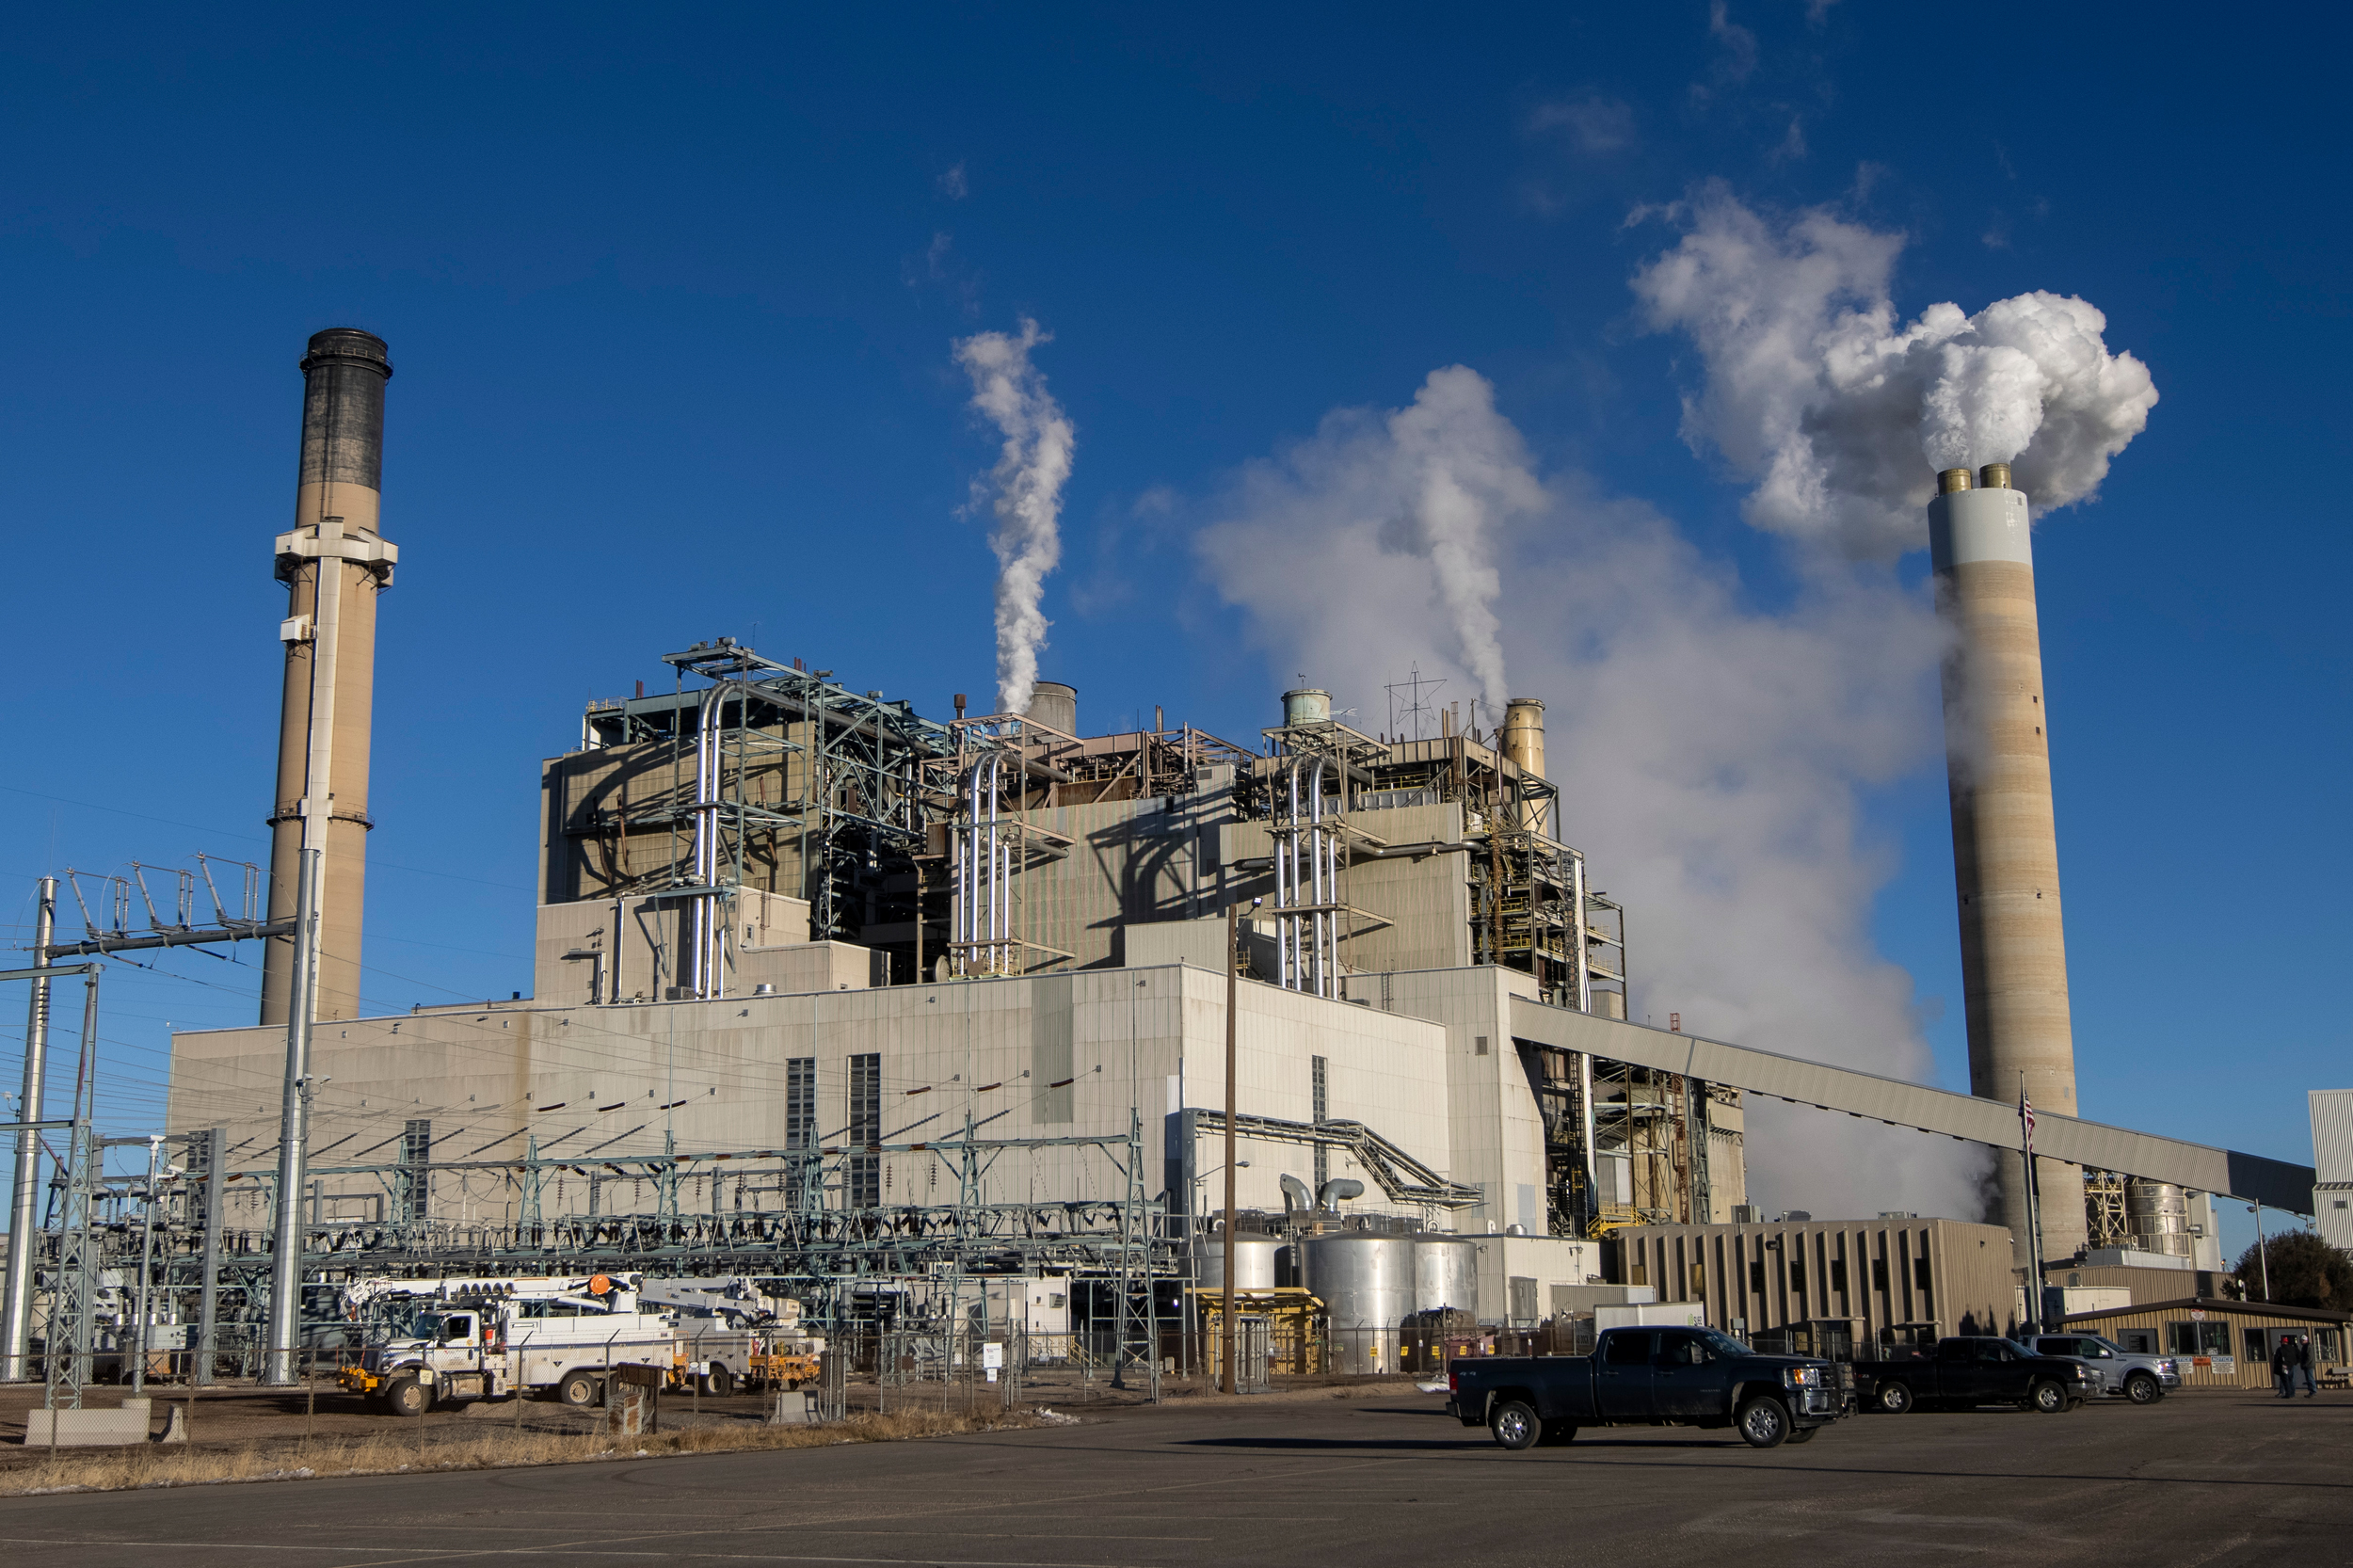 A mixture of steam and pollutants are emitted from the Naughton coal-fired power plant on Nov. 22, 2022 in Kemmerer, Wyo. Credit: Natalie Behring/Getty Images